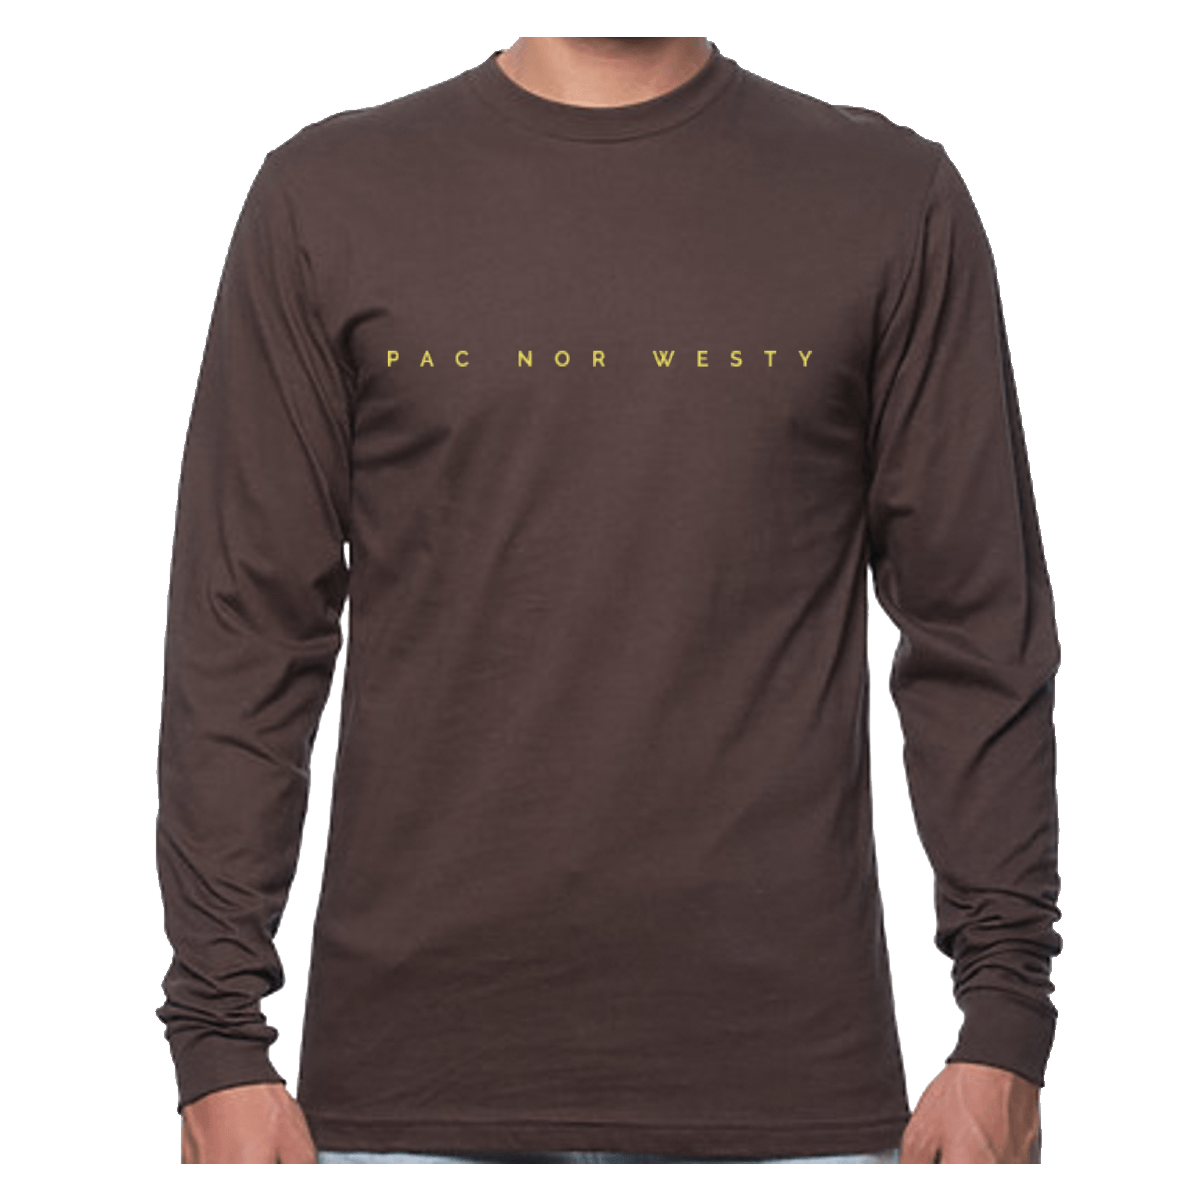 Pacific Northwest Sign Long Sleeve Tee